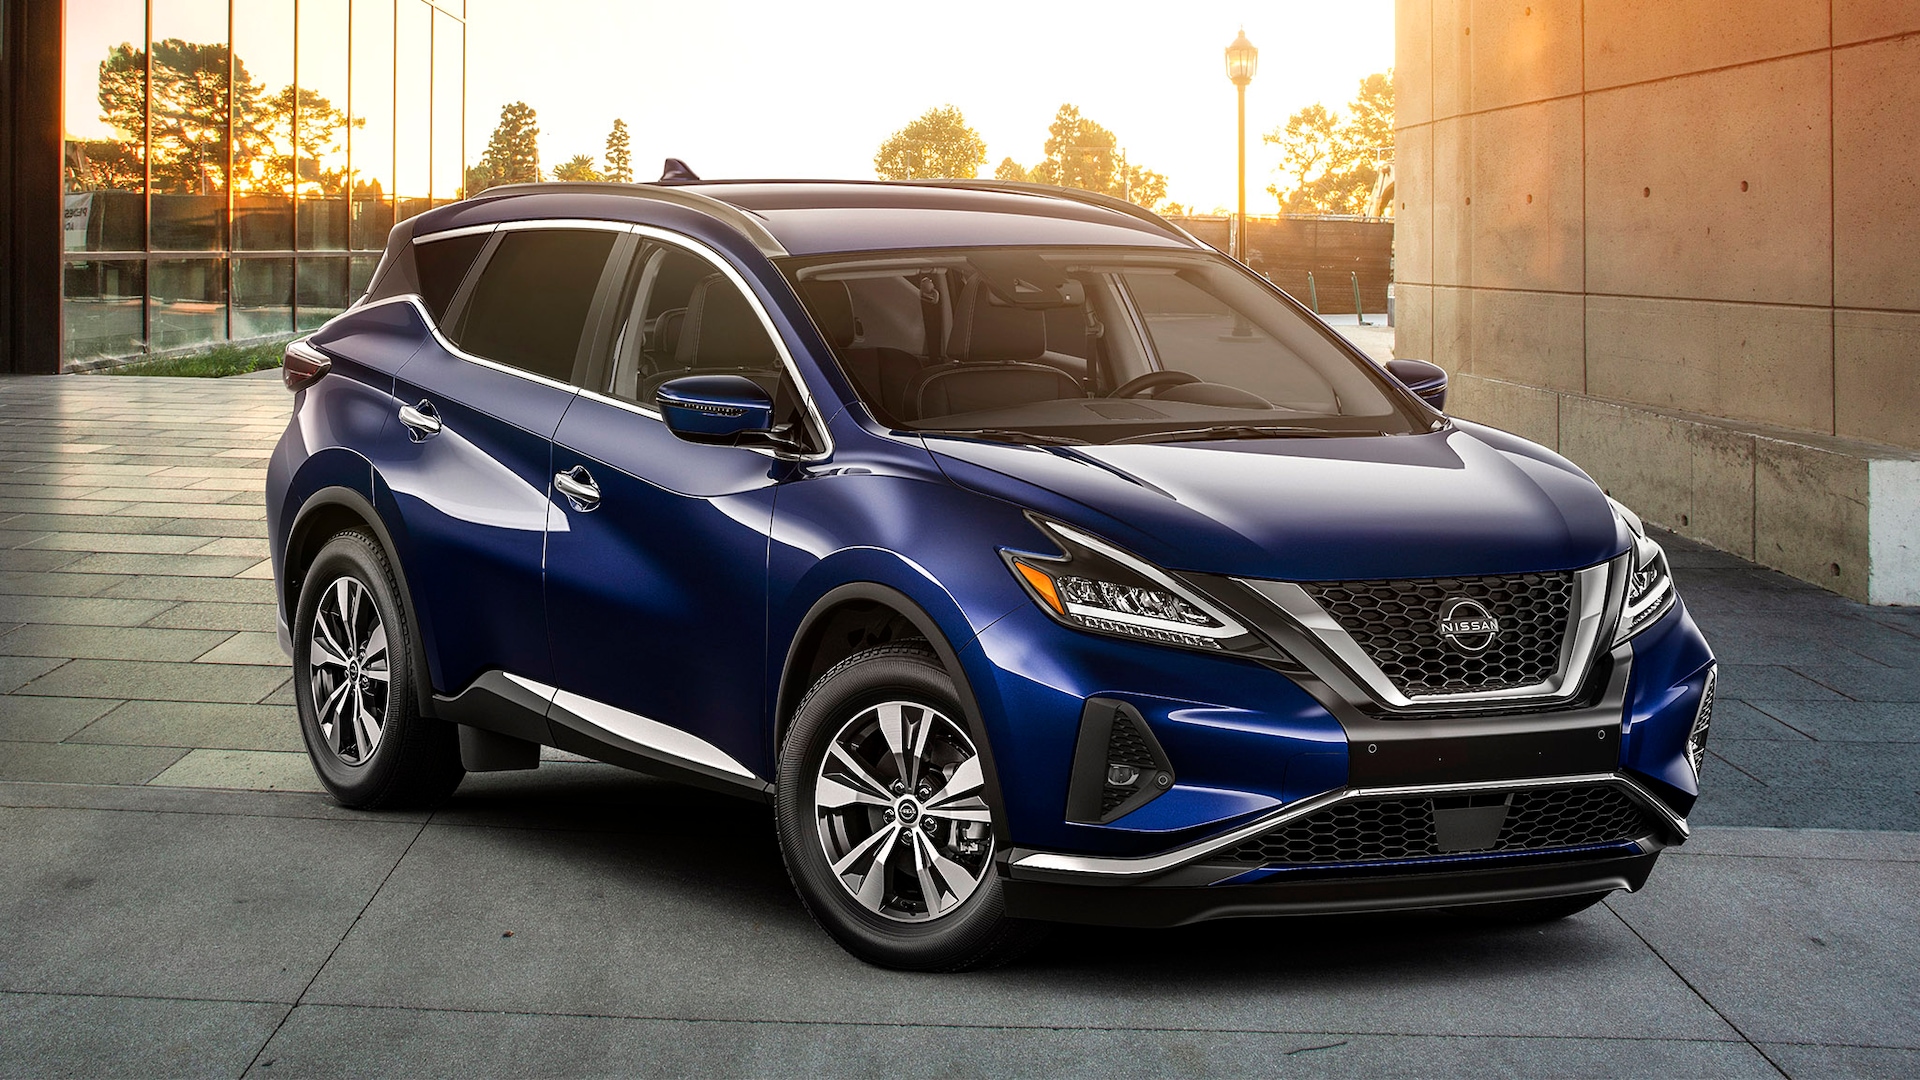 2023 Nissan Murano Prices, Reviews, and Photos - MotorTrend